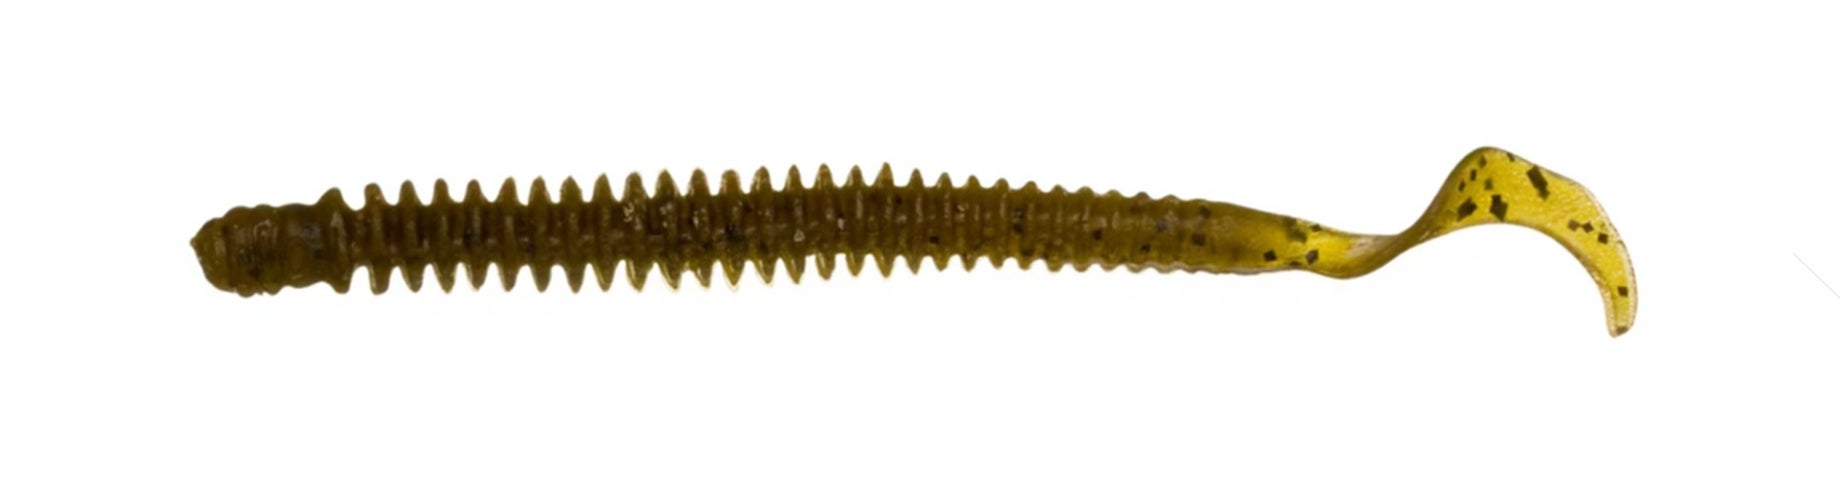 A 4-inch Zoom curly-tail soft-plastic worm on a white background.